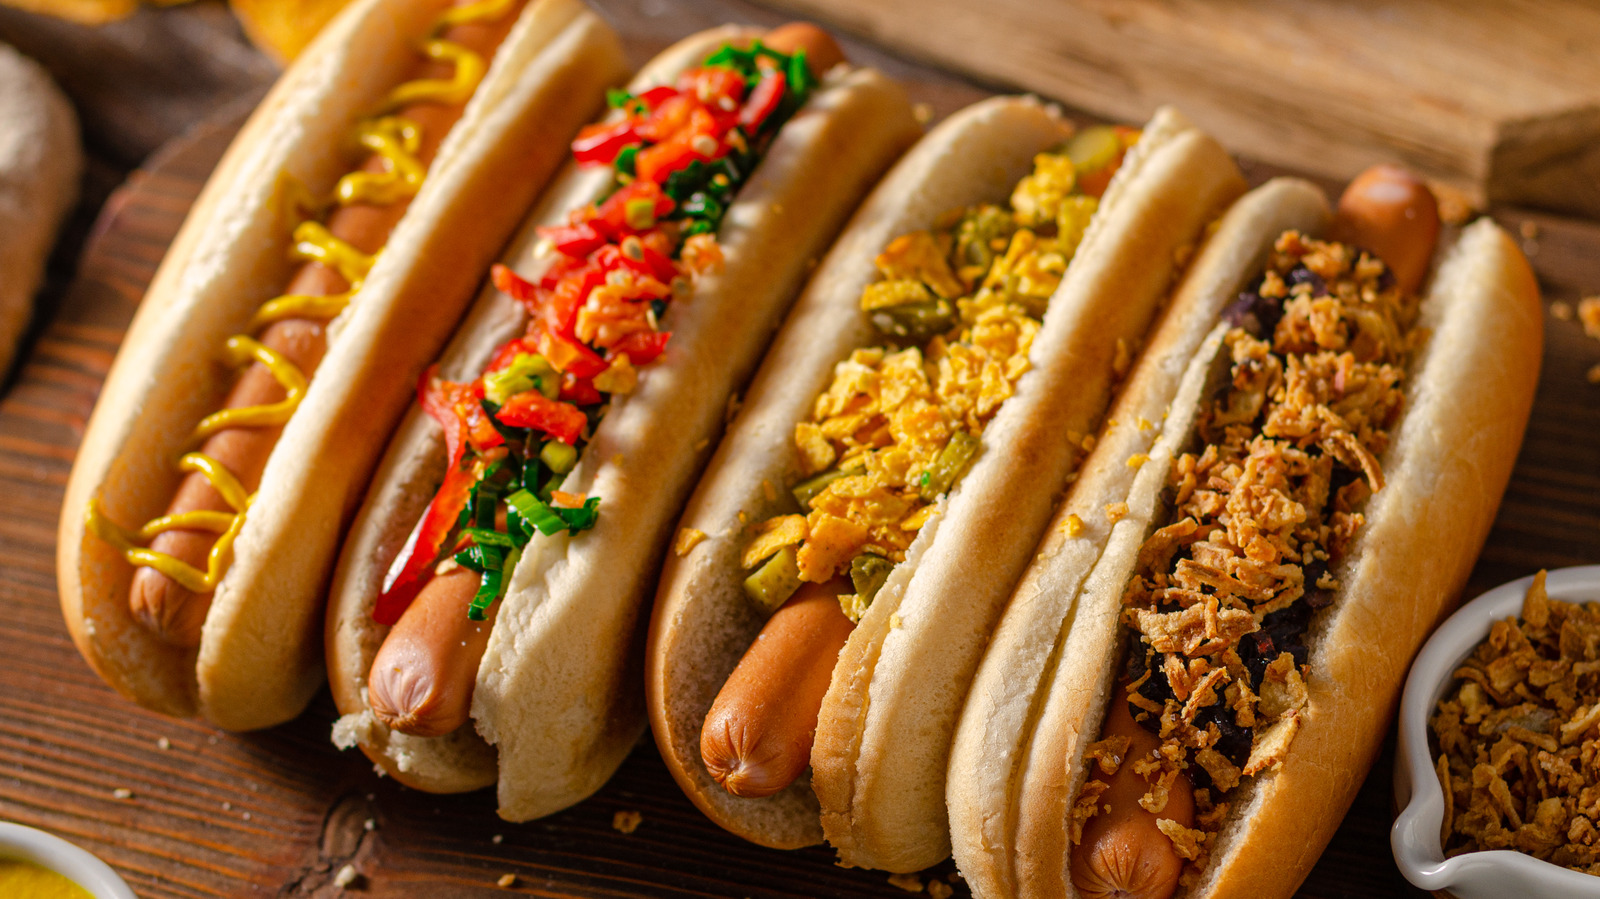 Gourmet Hot Dog Toppings and the California Hot Dog - Family Spice